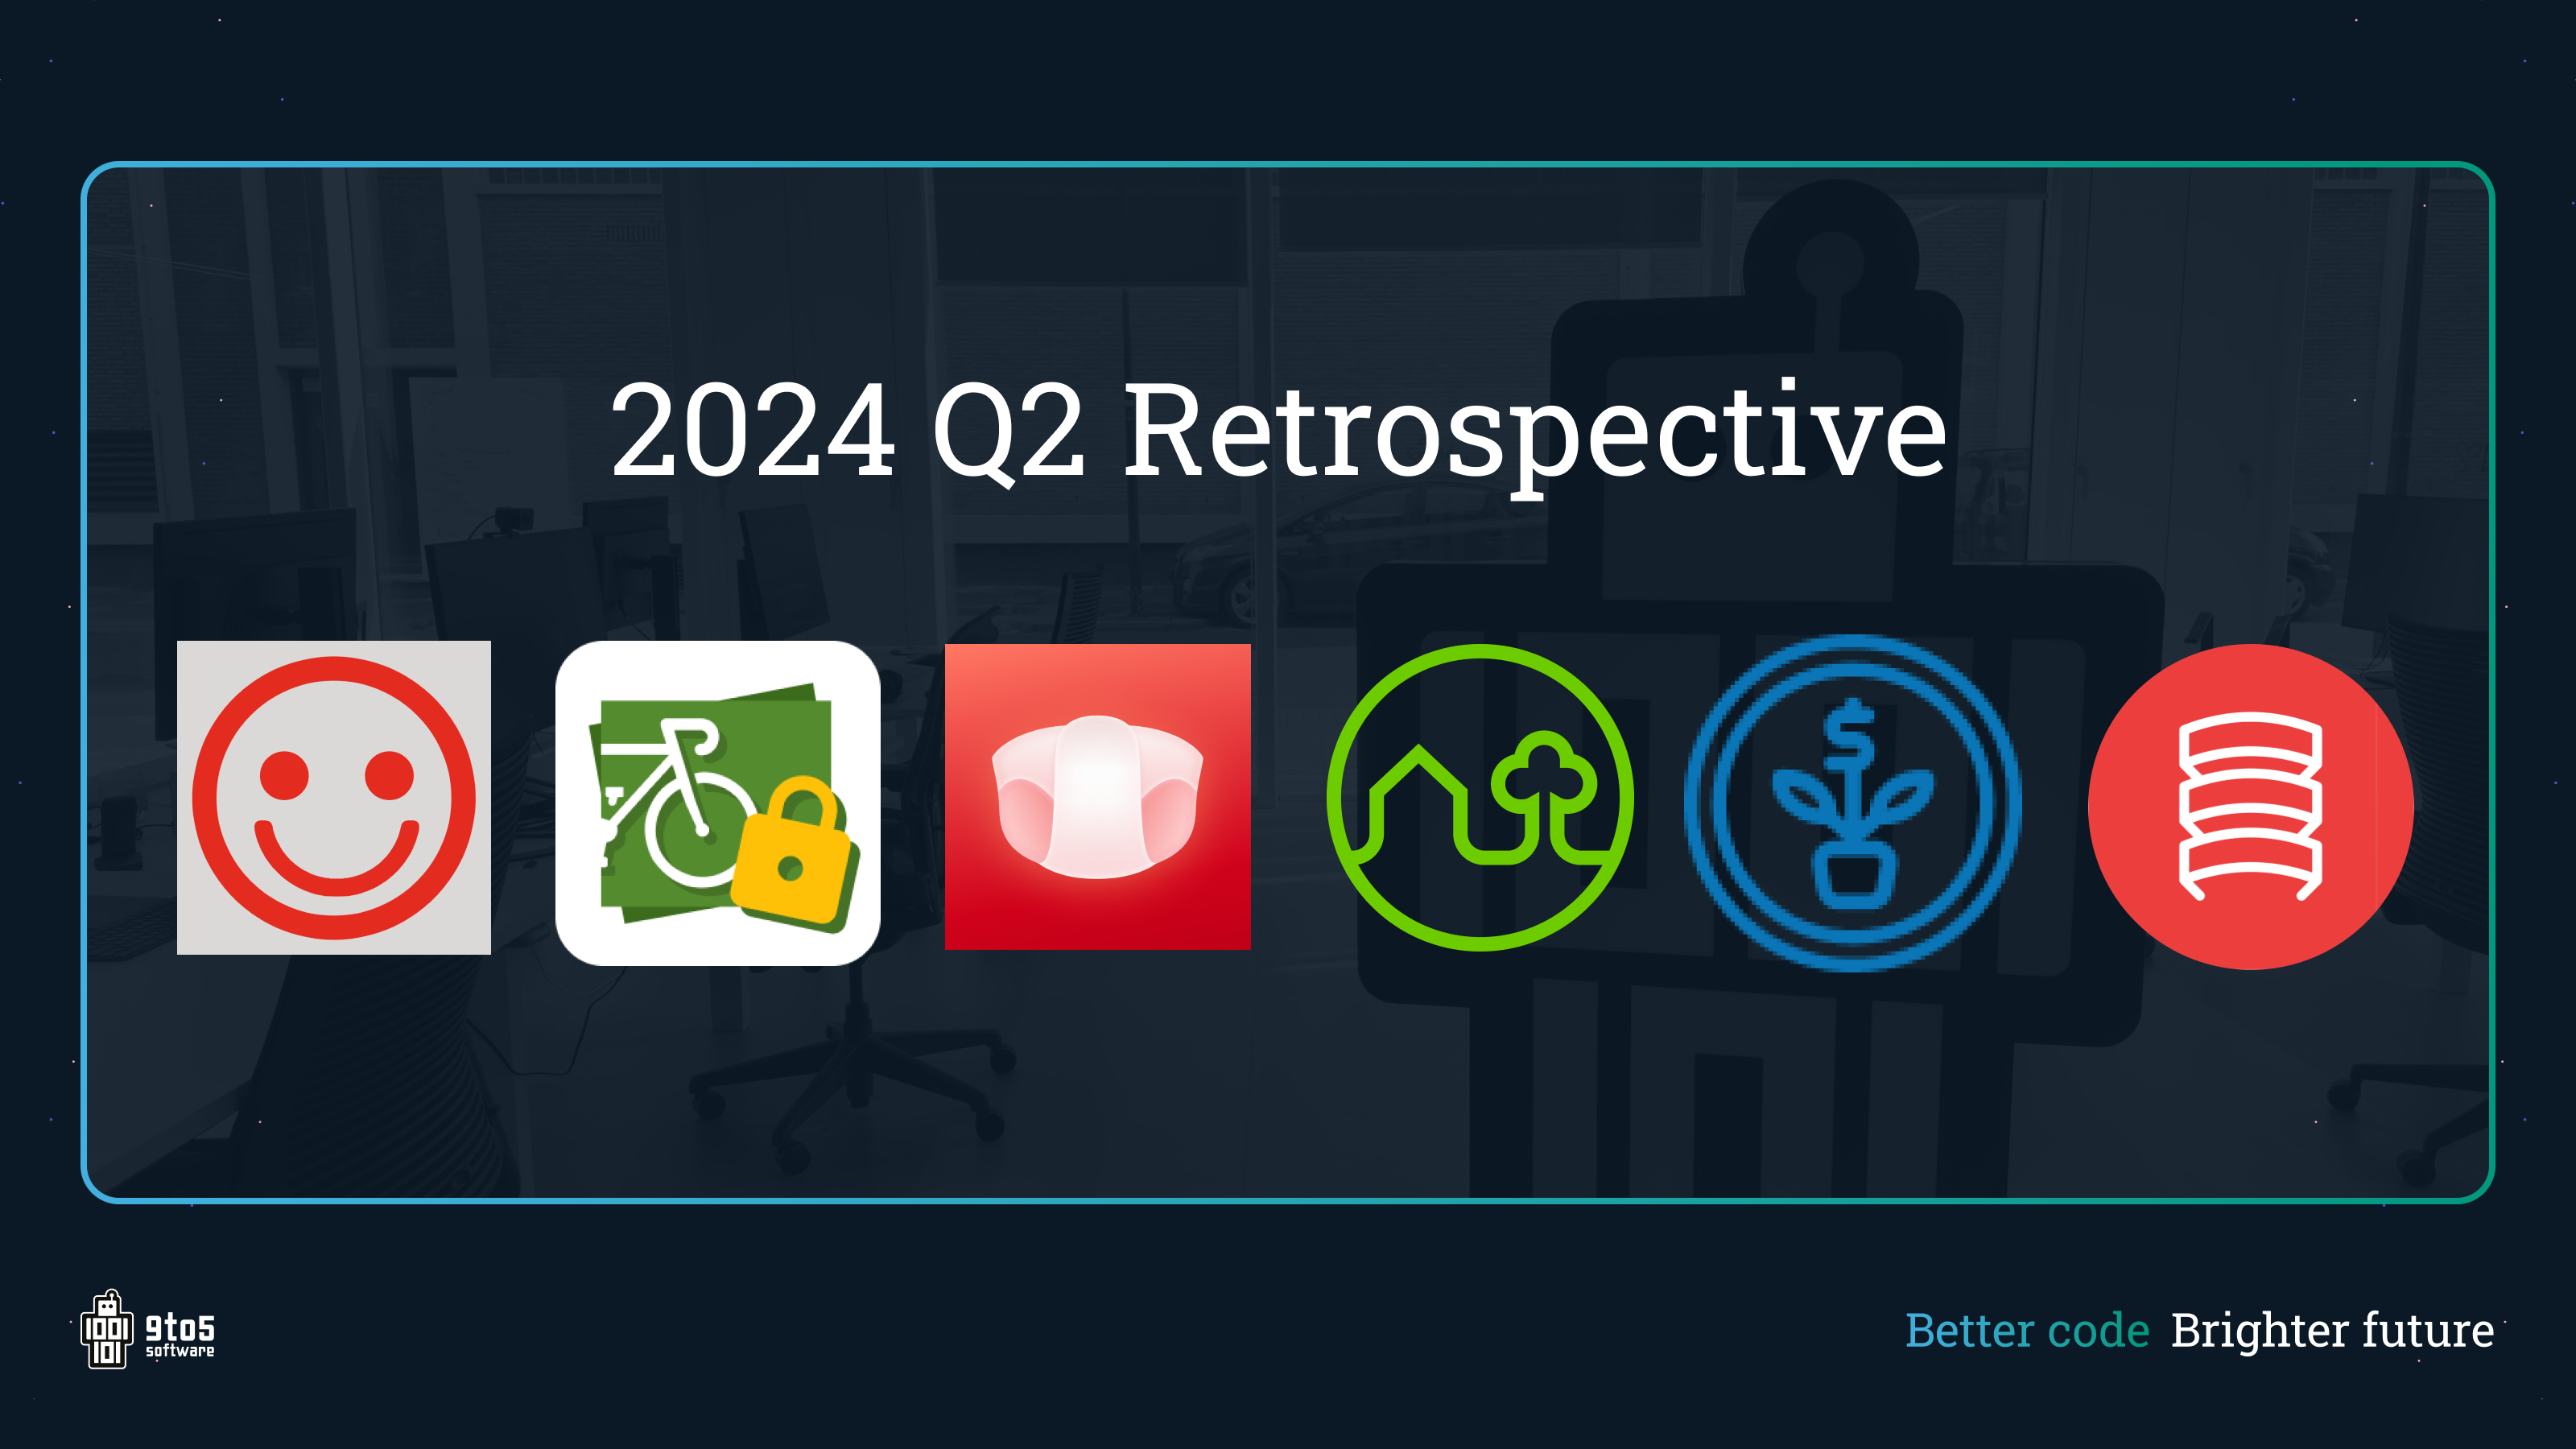 Q2 2024 Retrospective: A quarter of innovation at 9to5 - From minor updates and app maintenance to new features and even two new launches! This blog provides an overview of everything we've achieved over the past three months.